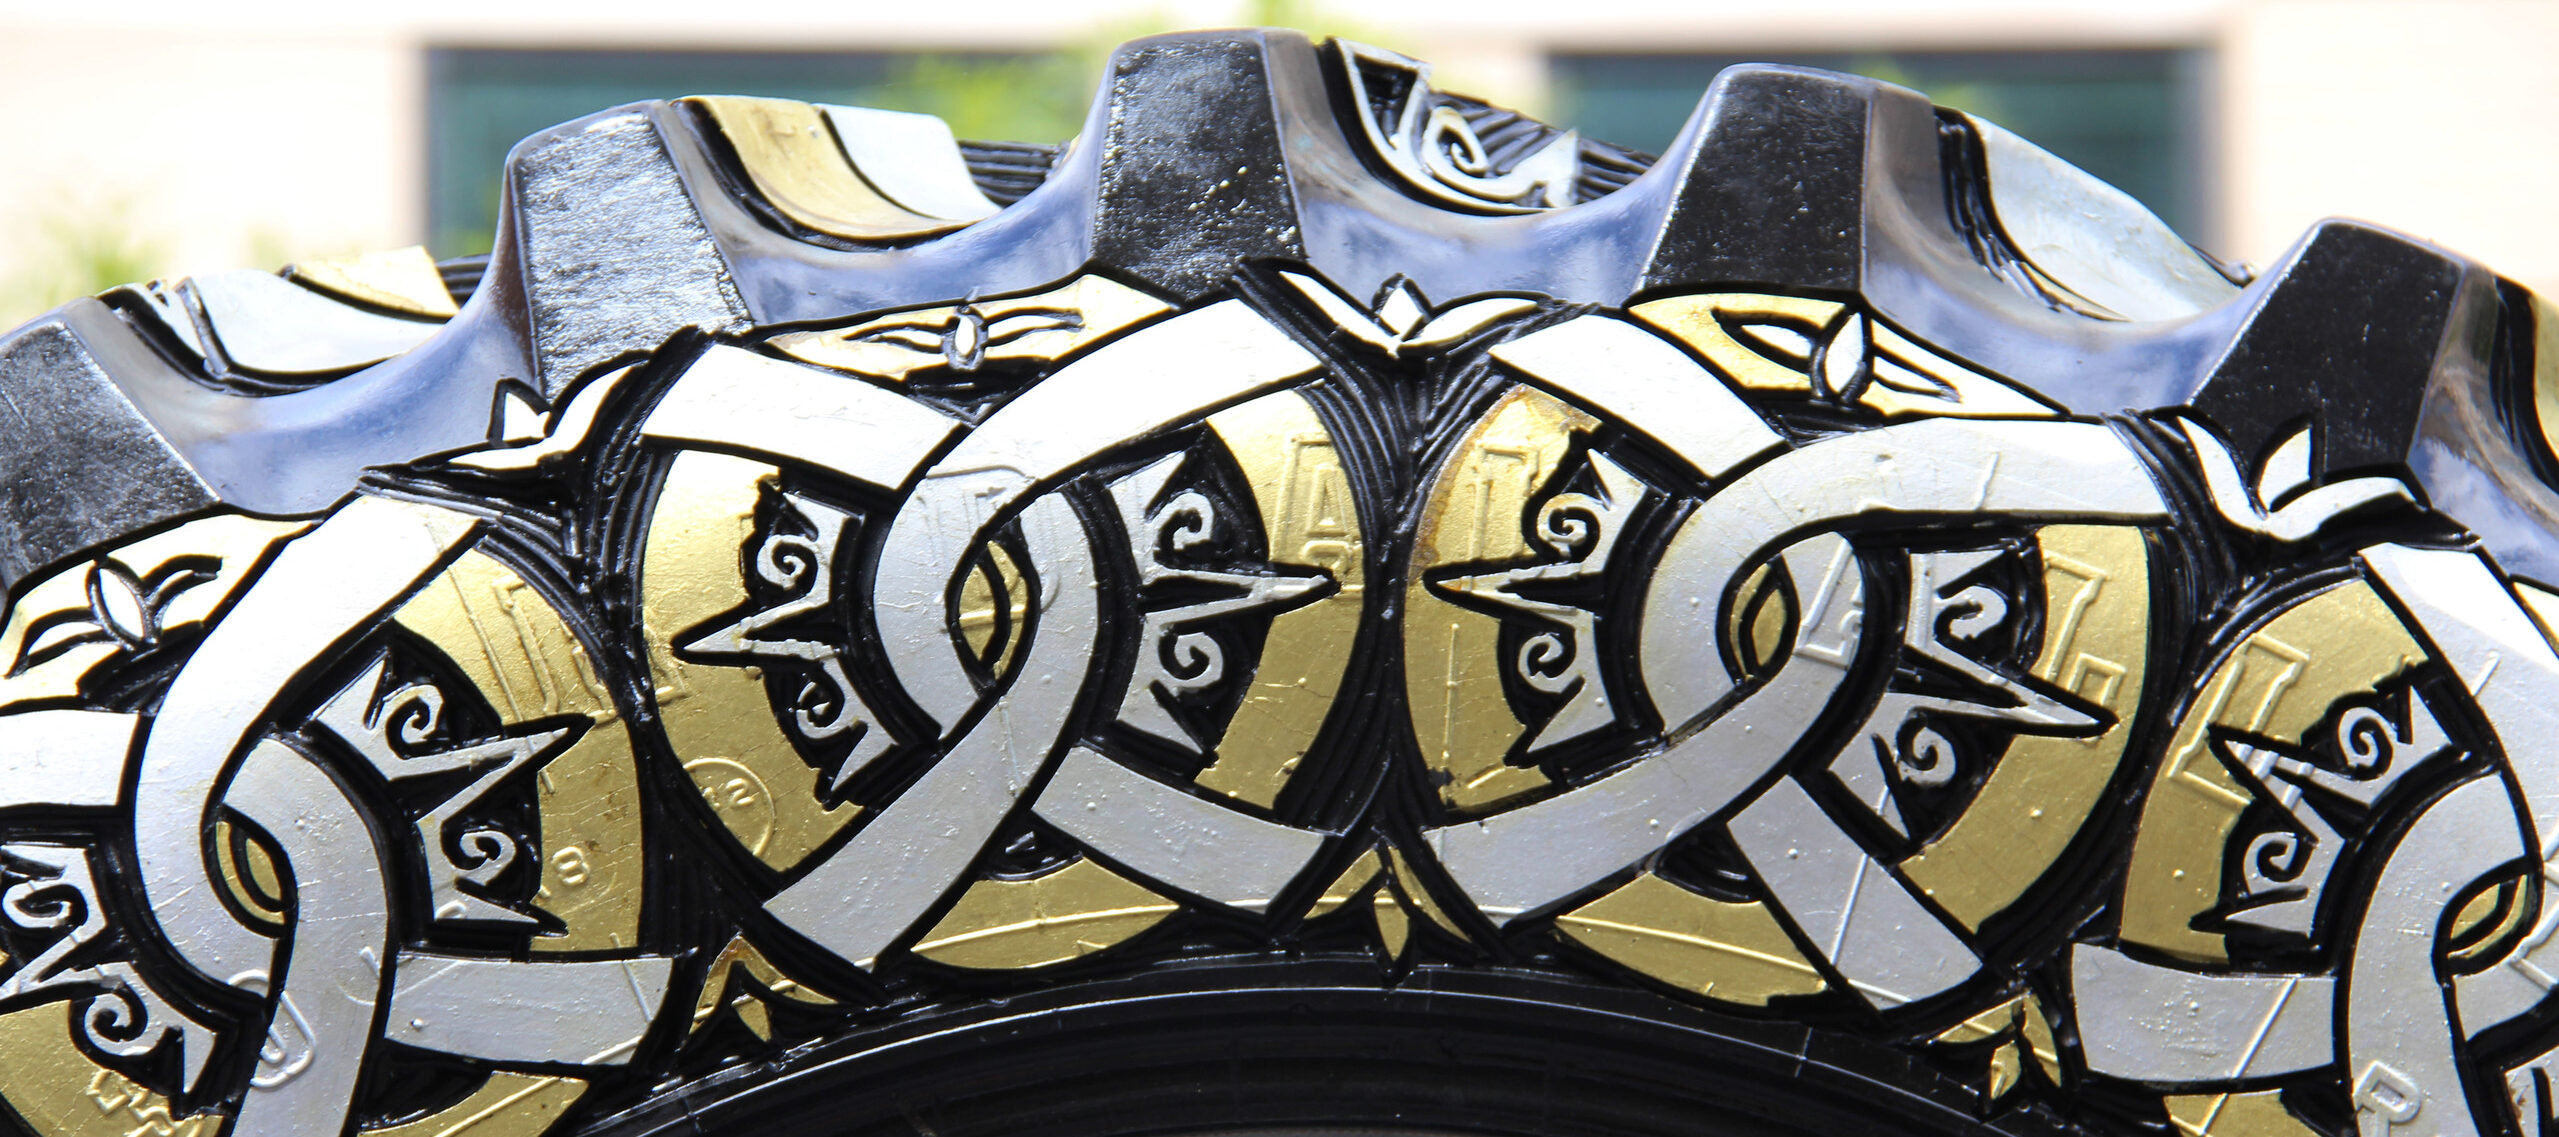 Close up view of an oversized tire with carved designs painted in silver and gold.